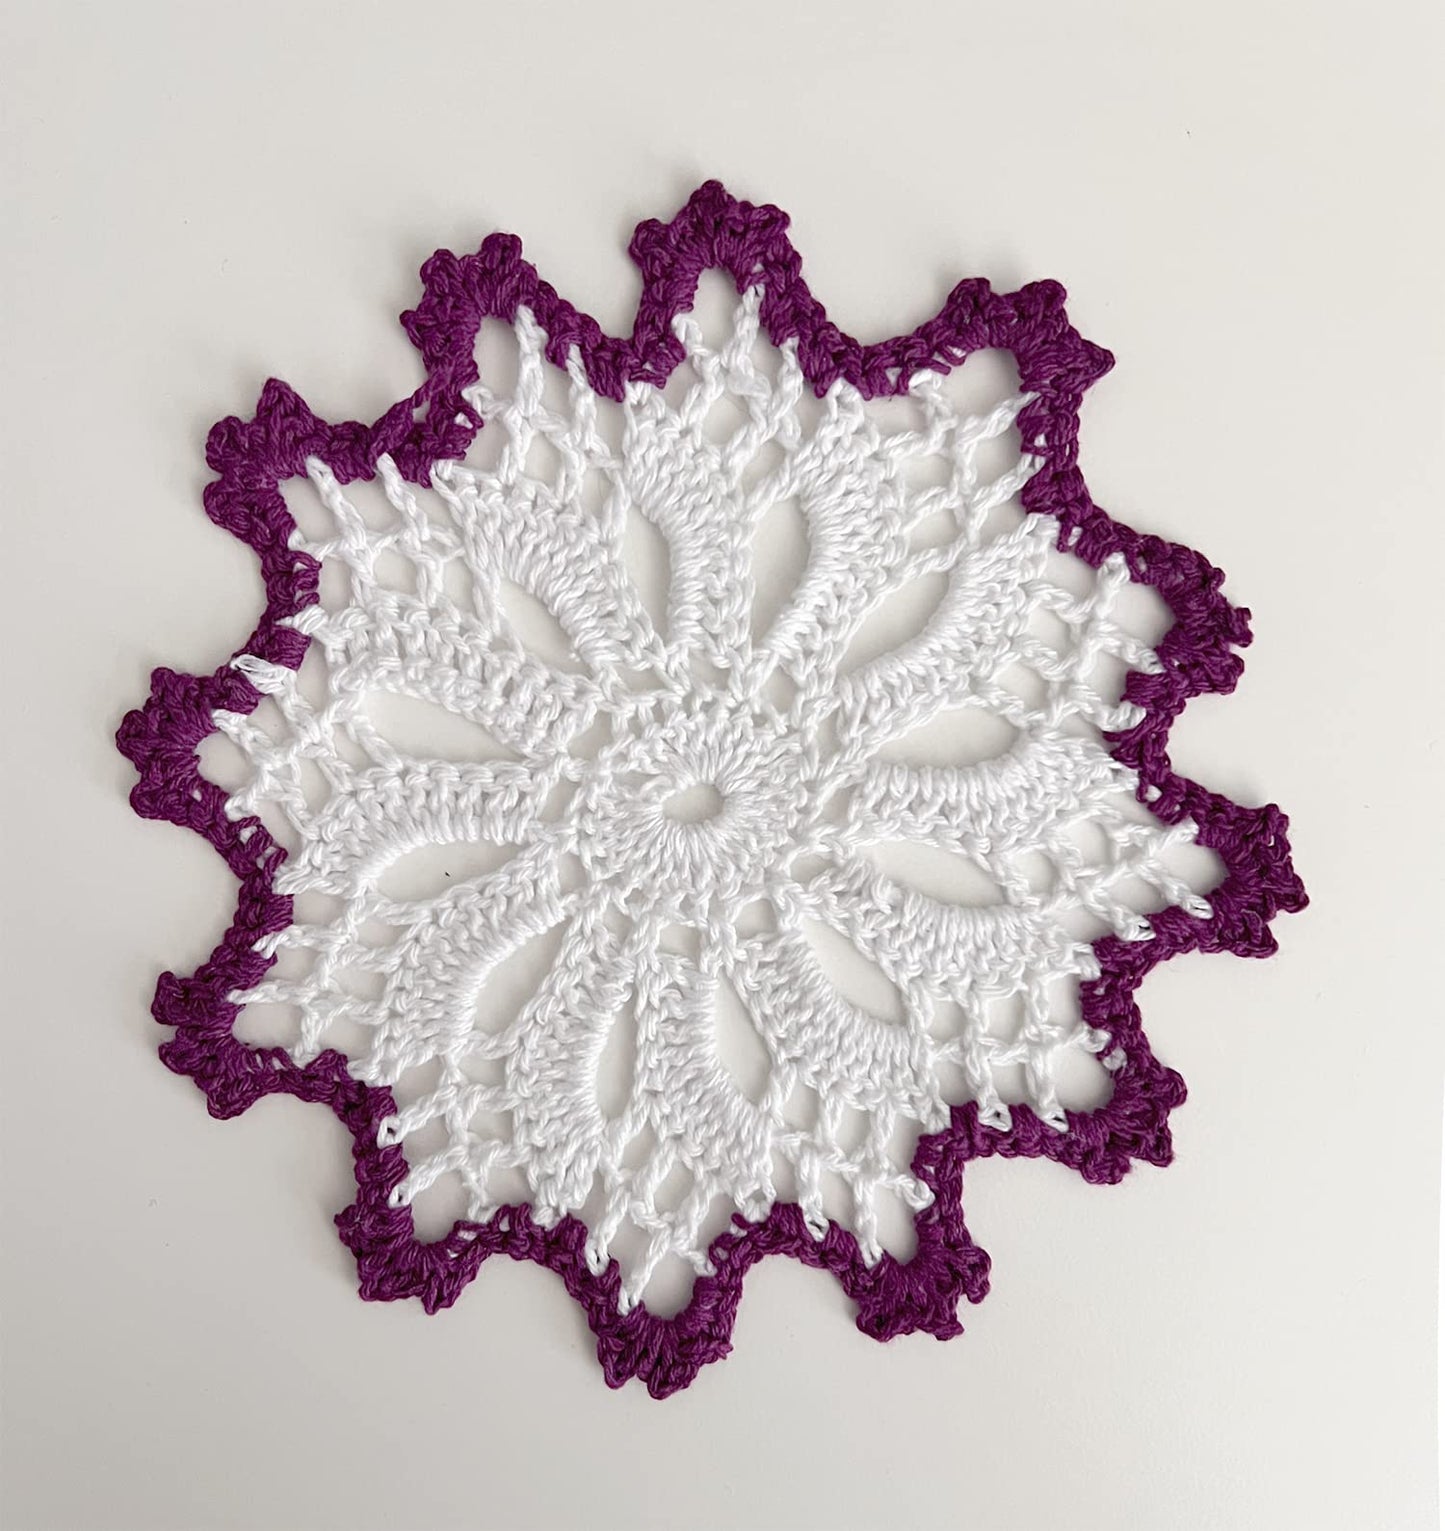 Fennco Styles Handmade Crochet Cotton Whirlwind Two-Tone Doily 6-Inch Round, 2-Piece - Drink Coaster for Everyday Use, Holiday, Farmhouse Décor, Cocktail, Tea Party, Special Occasion